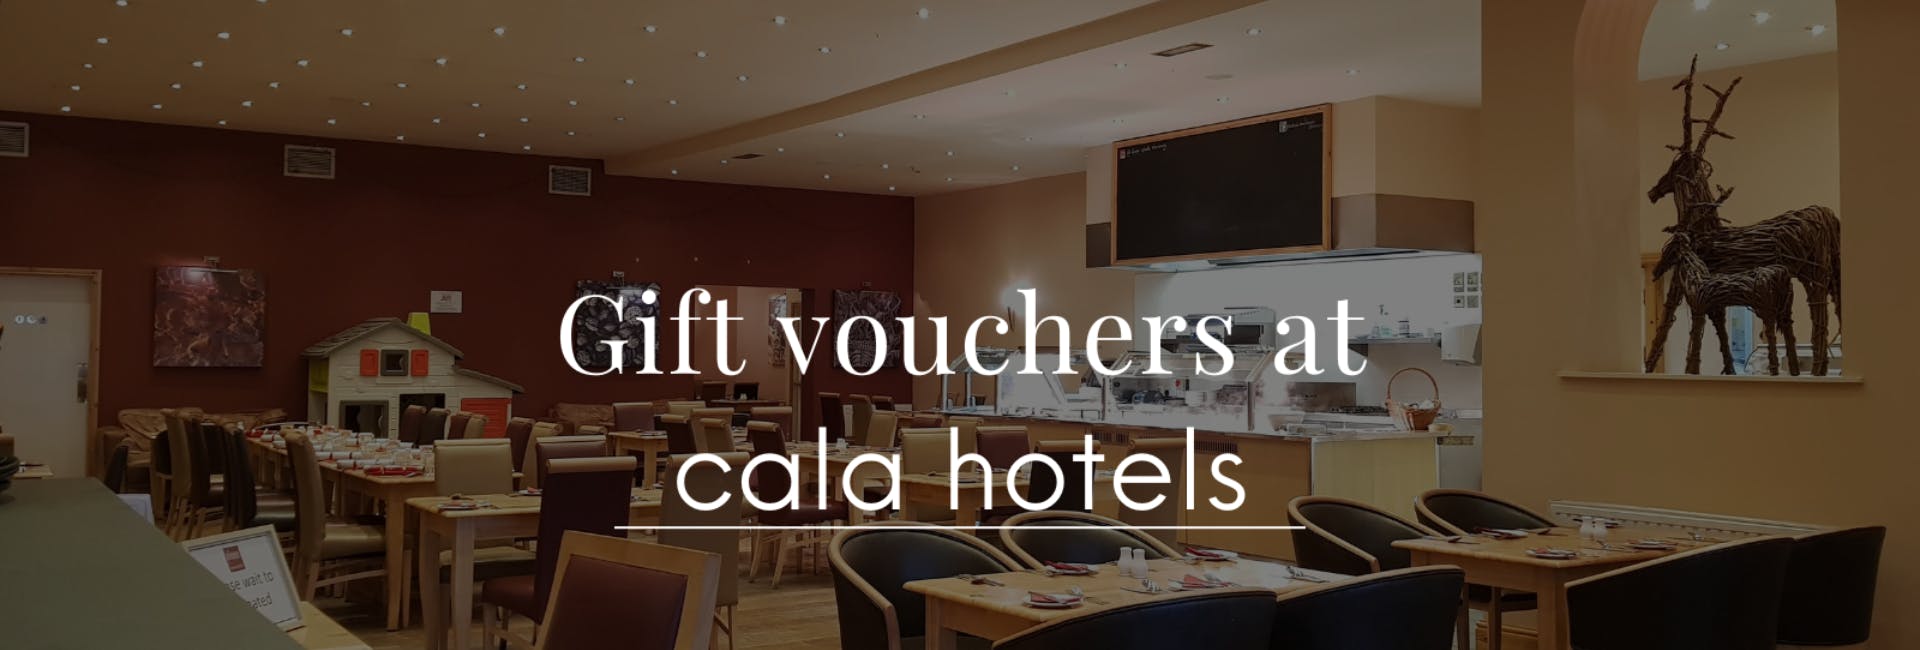 Gift vouchers available at the Cala Hotels, white text overlayed on greyed out image of the a restaurant